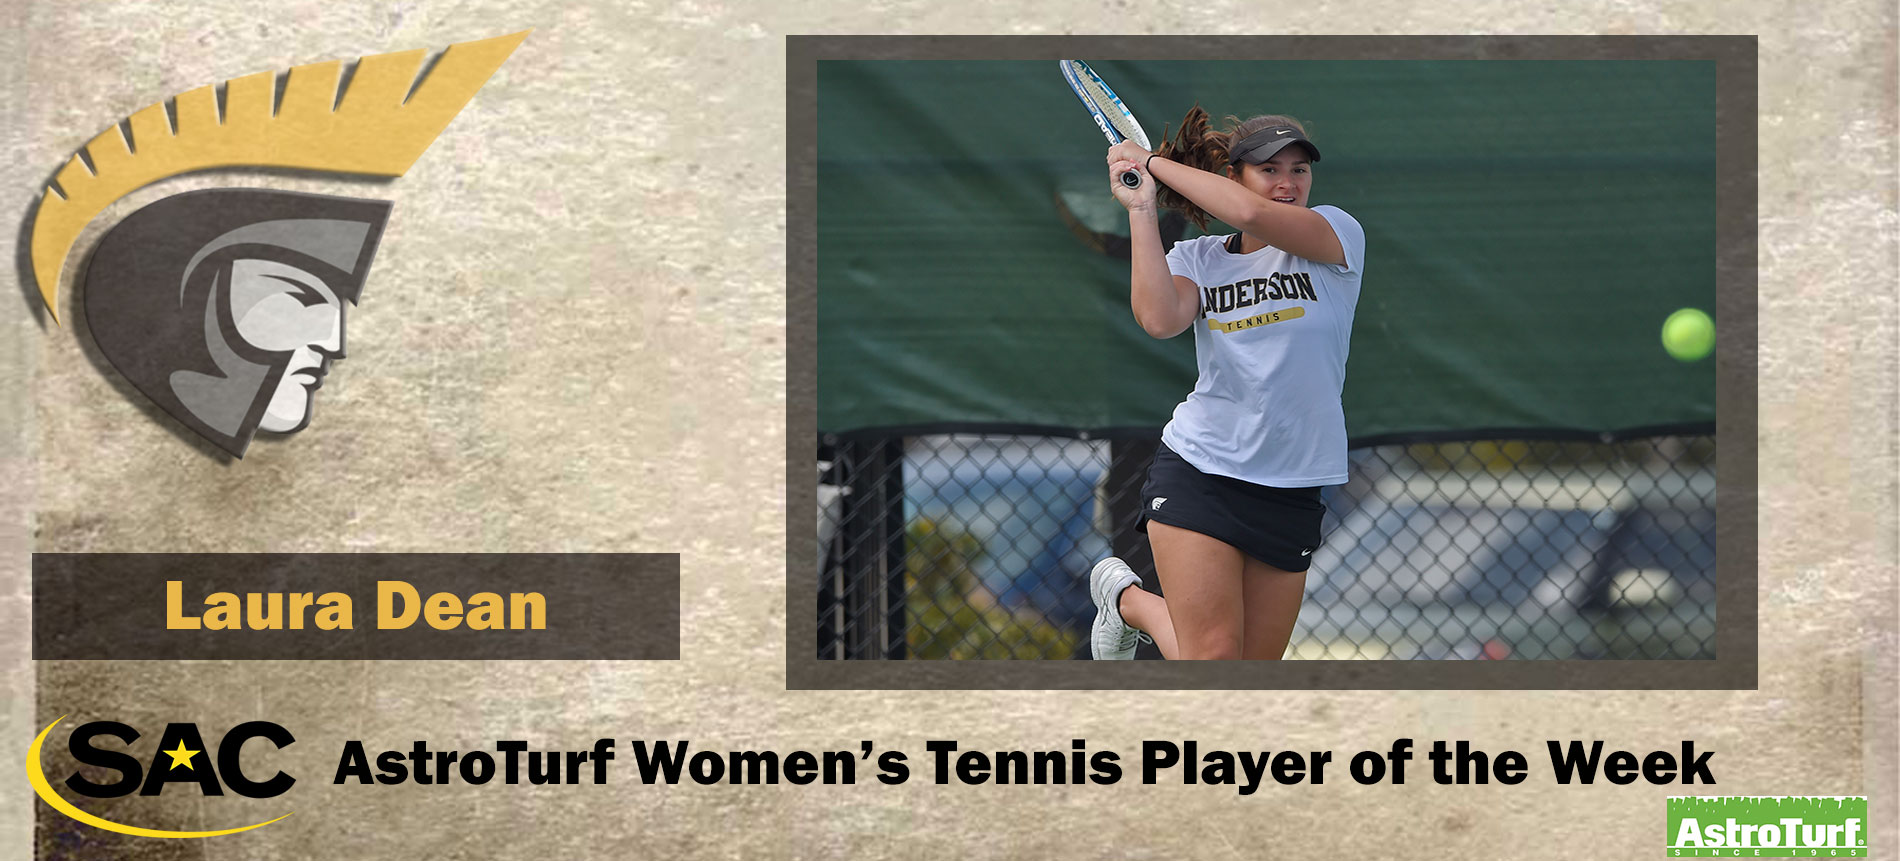 Dean Earns South Atlantic Conference AstroTurf Women’s Tennis Player of the Week